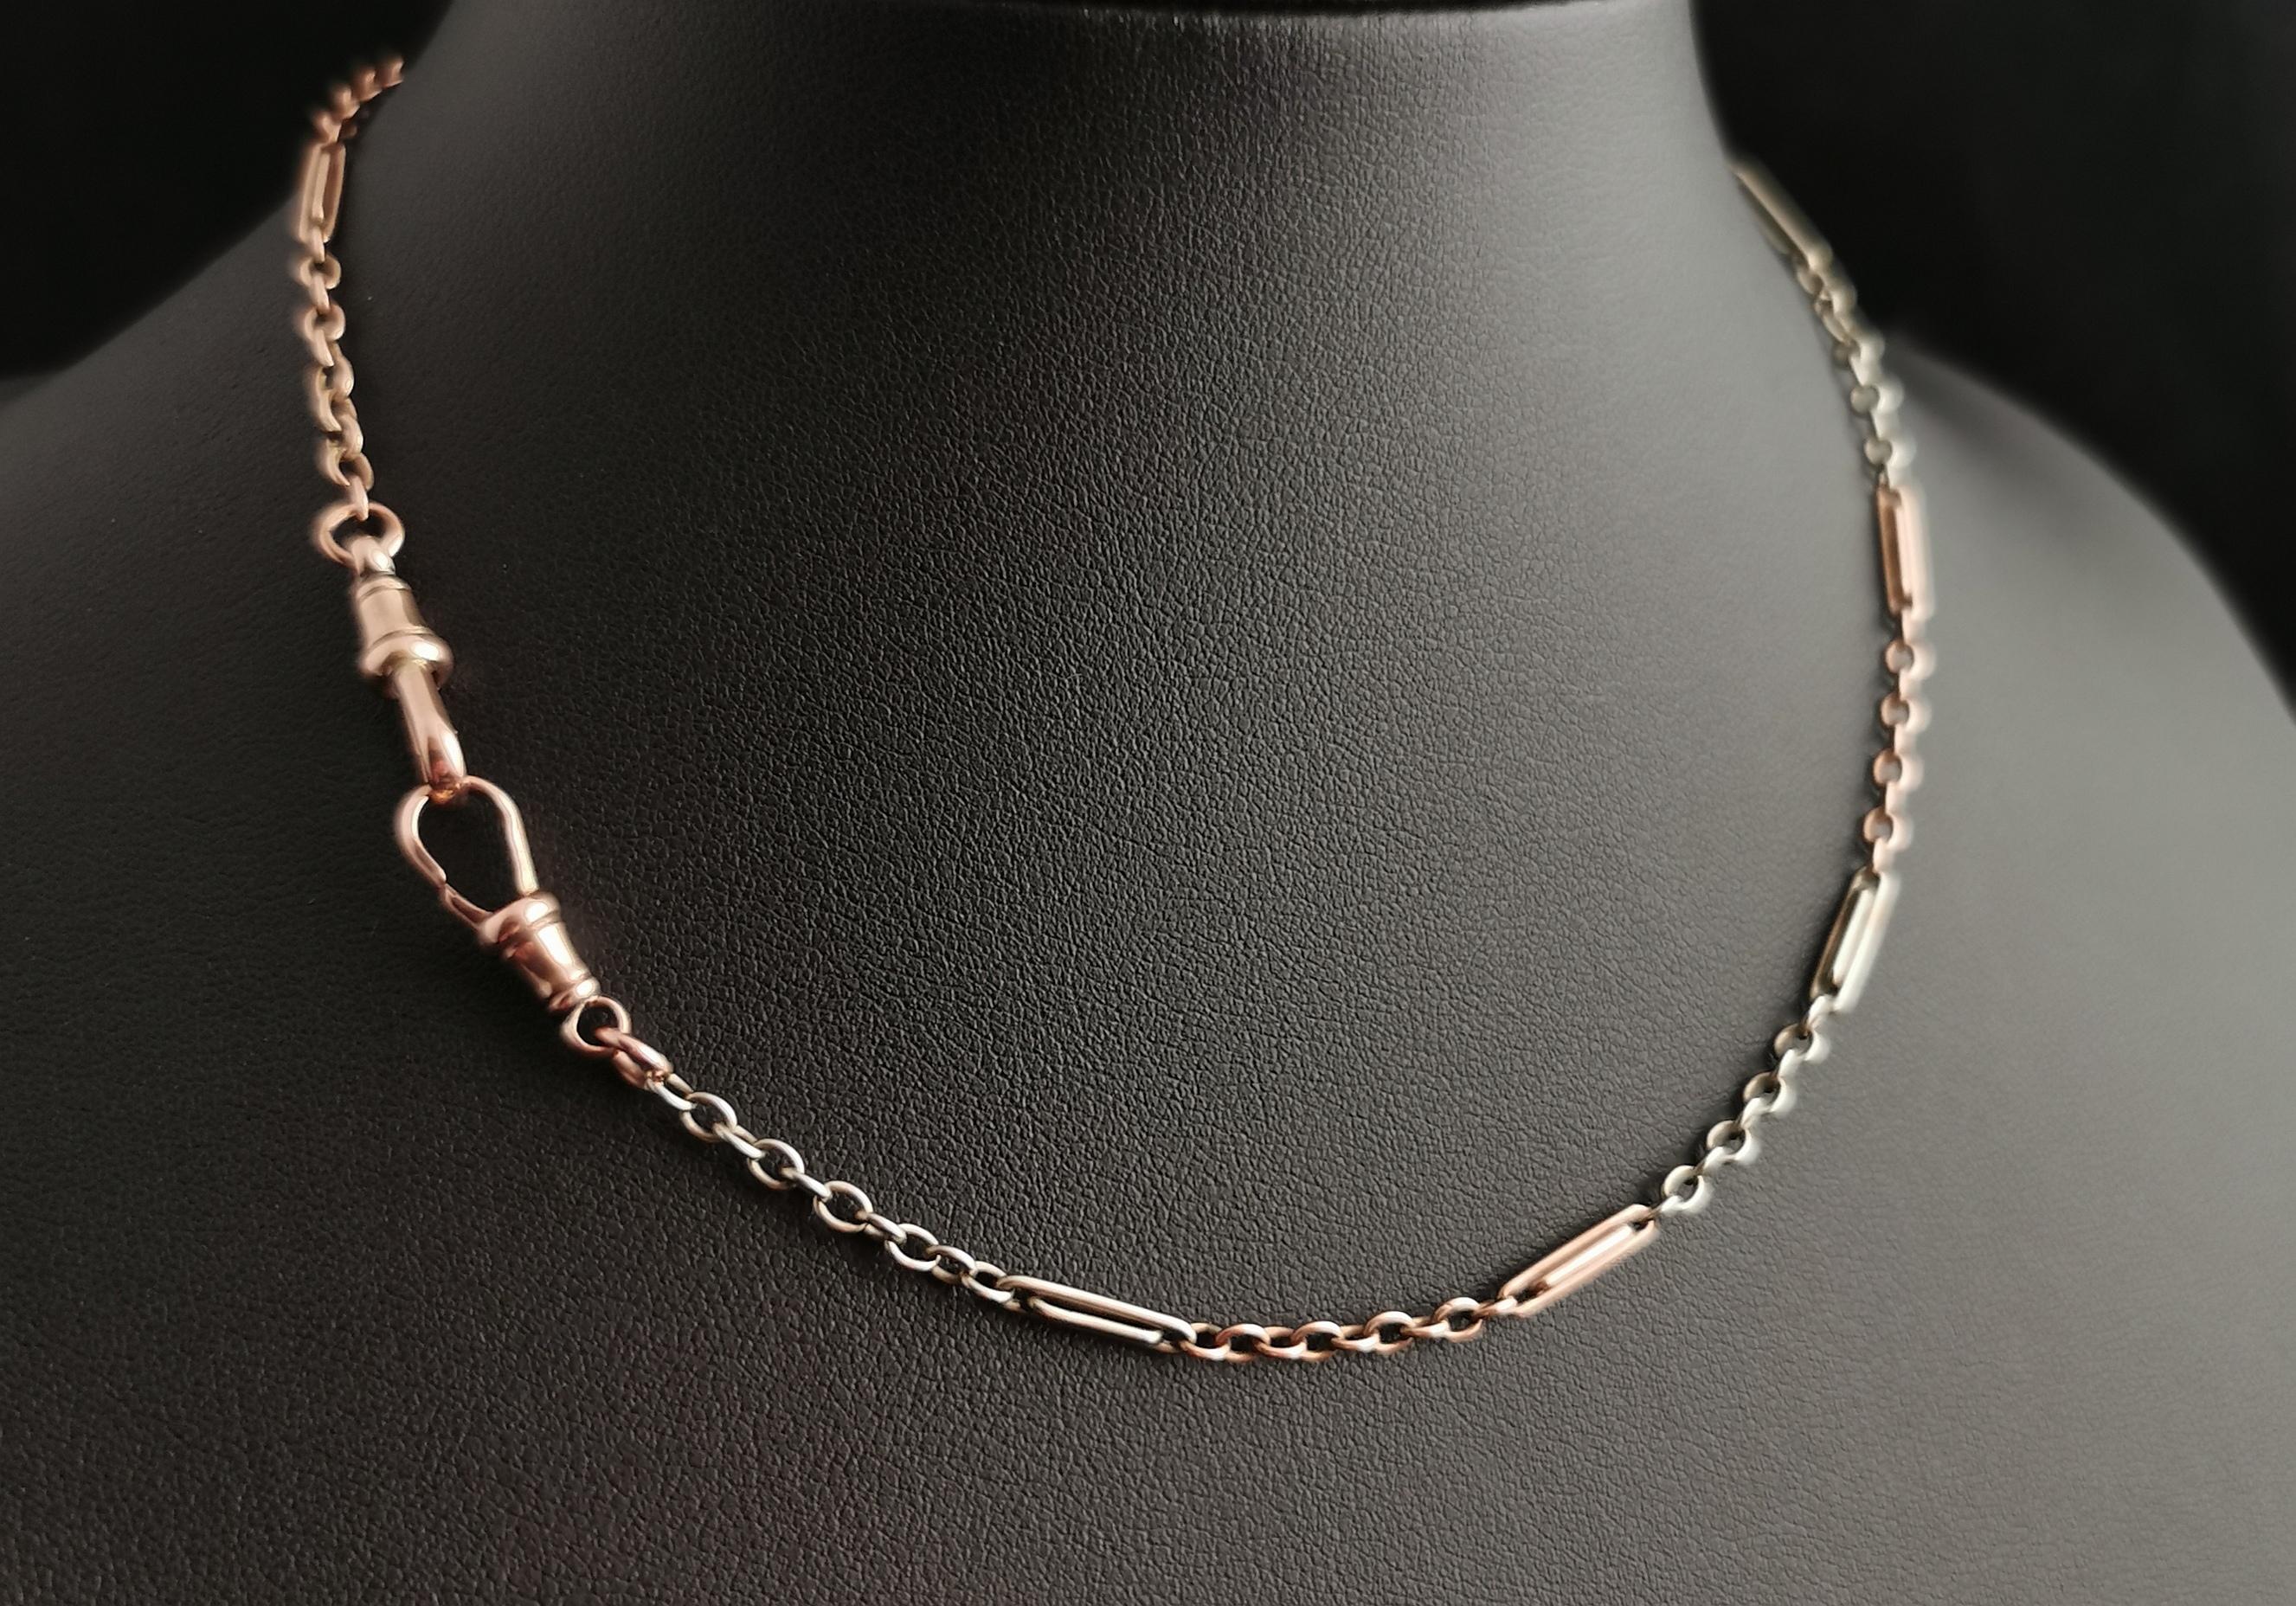 A truly stunning vintage Art Deco era fancy link Albert chain in 9kt mixed or bi colour gold.

This beautiful chain has fancy paperclip links intercepted by oval belcher links and has two colours of gold.

9kt Rose gold and 9kt white gold are used